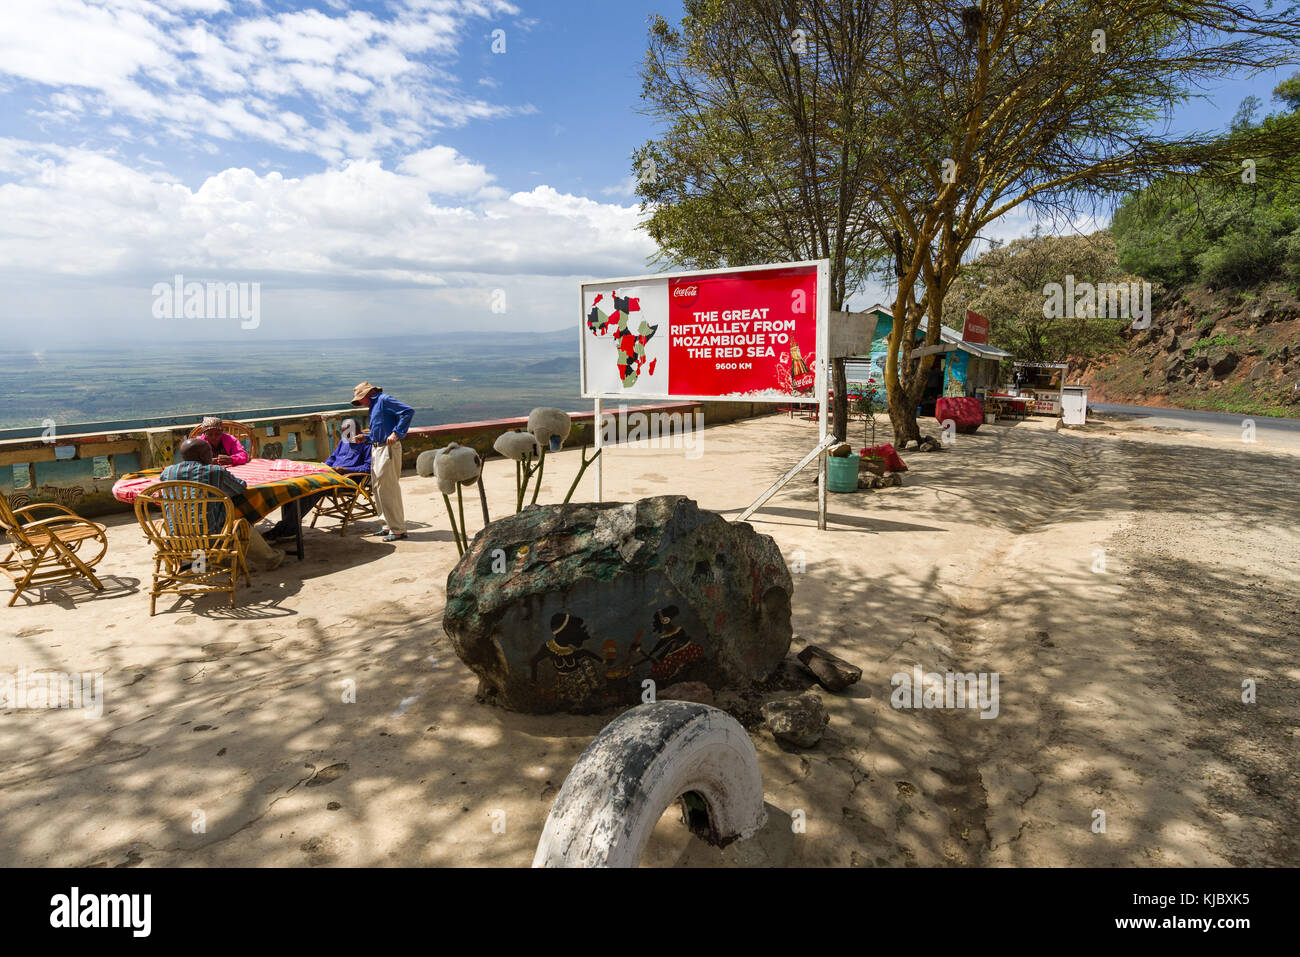 Roadside viewpoint rest stop with people sat at a table looking at the view to the Rift valley, Kenya, East Africa Stock Photo